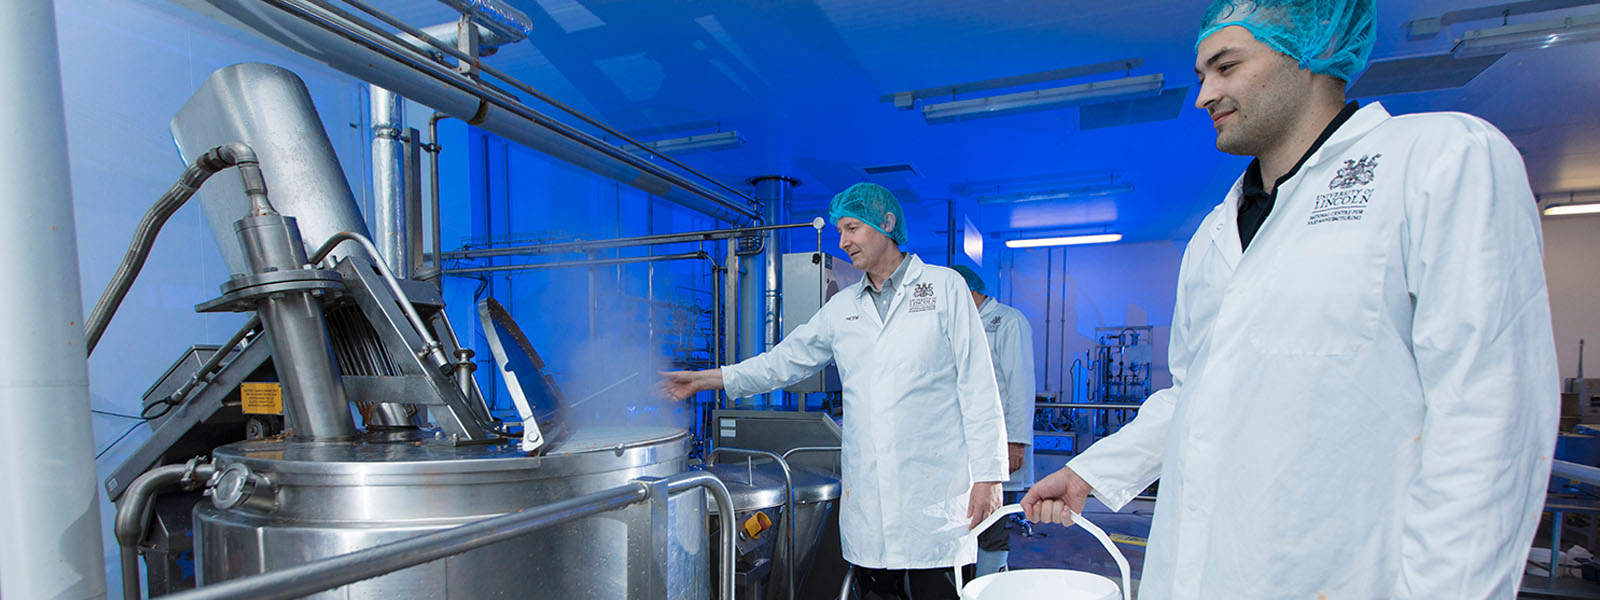 Apprentices working at the National Centre for Food Manufacturing